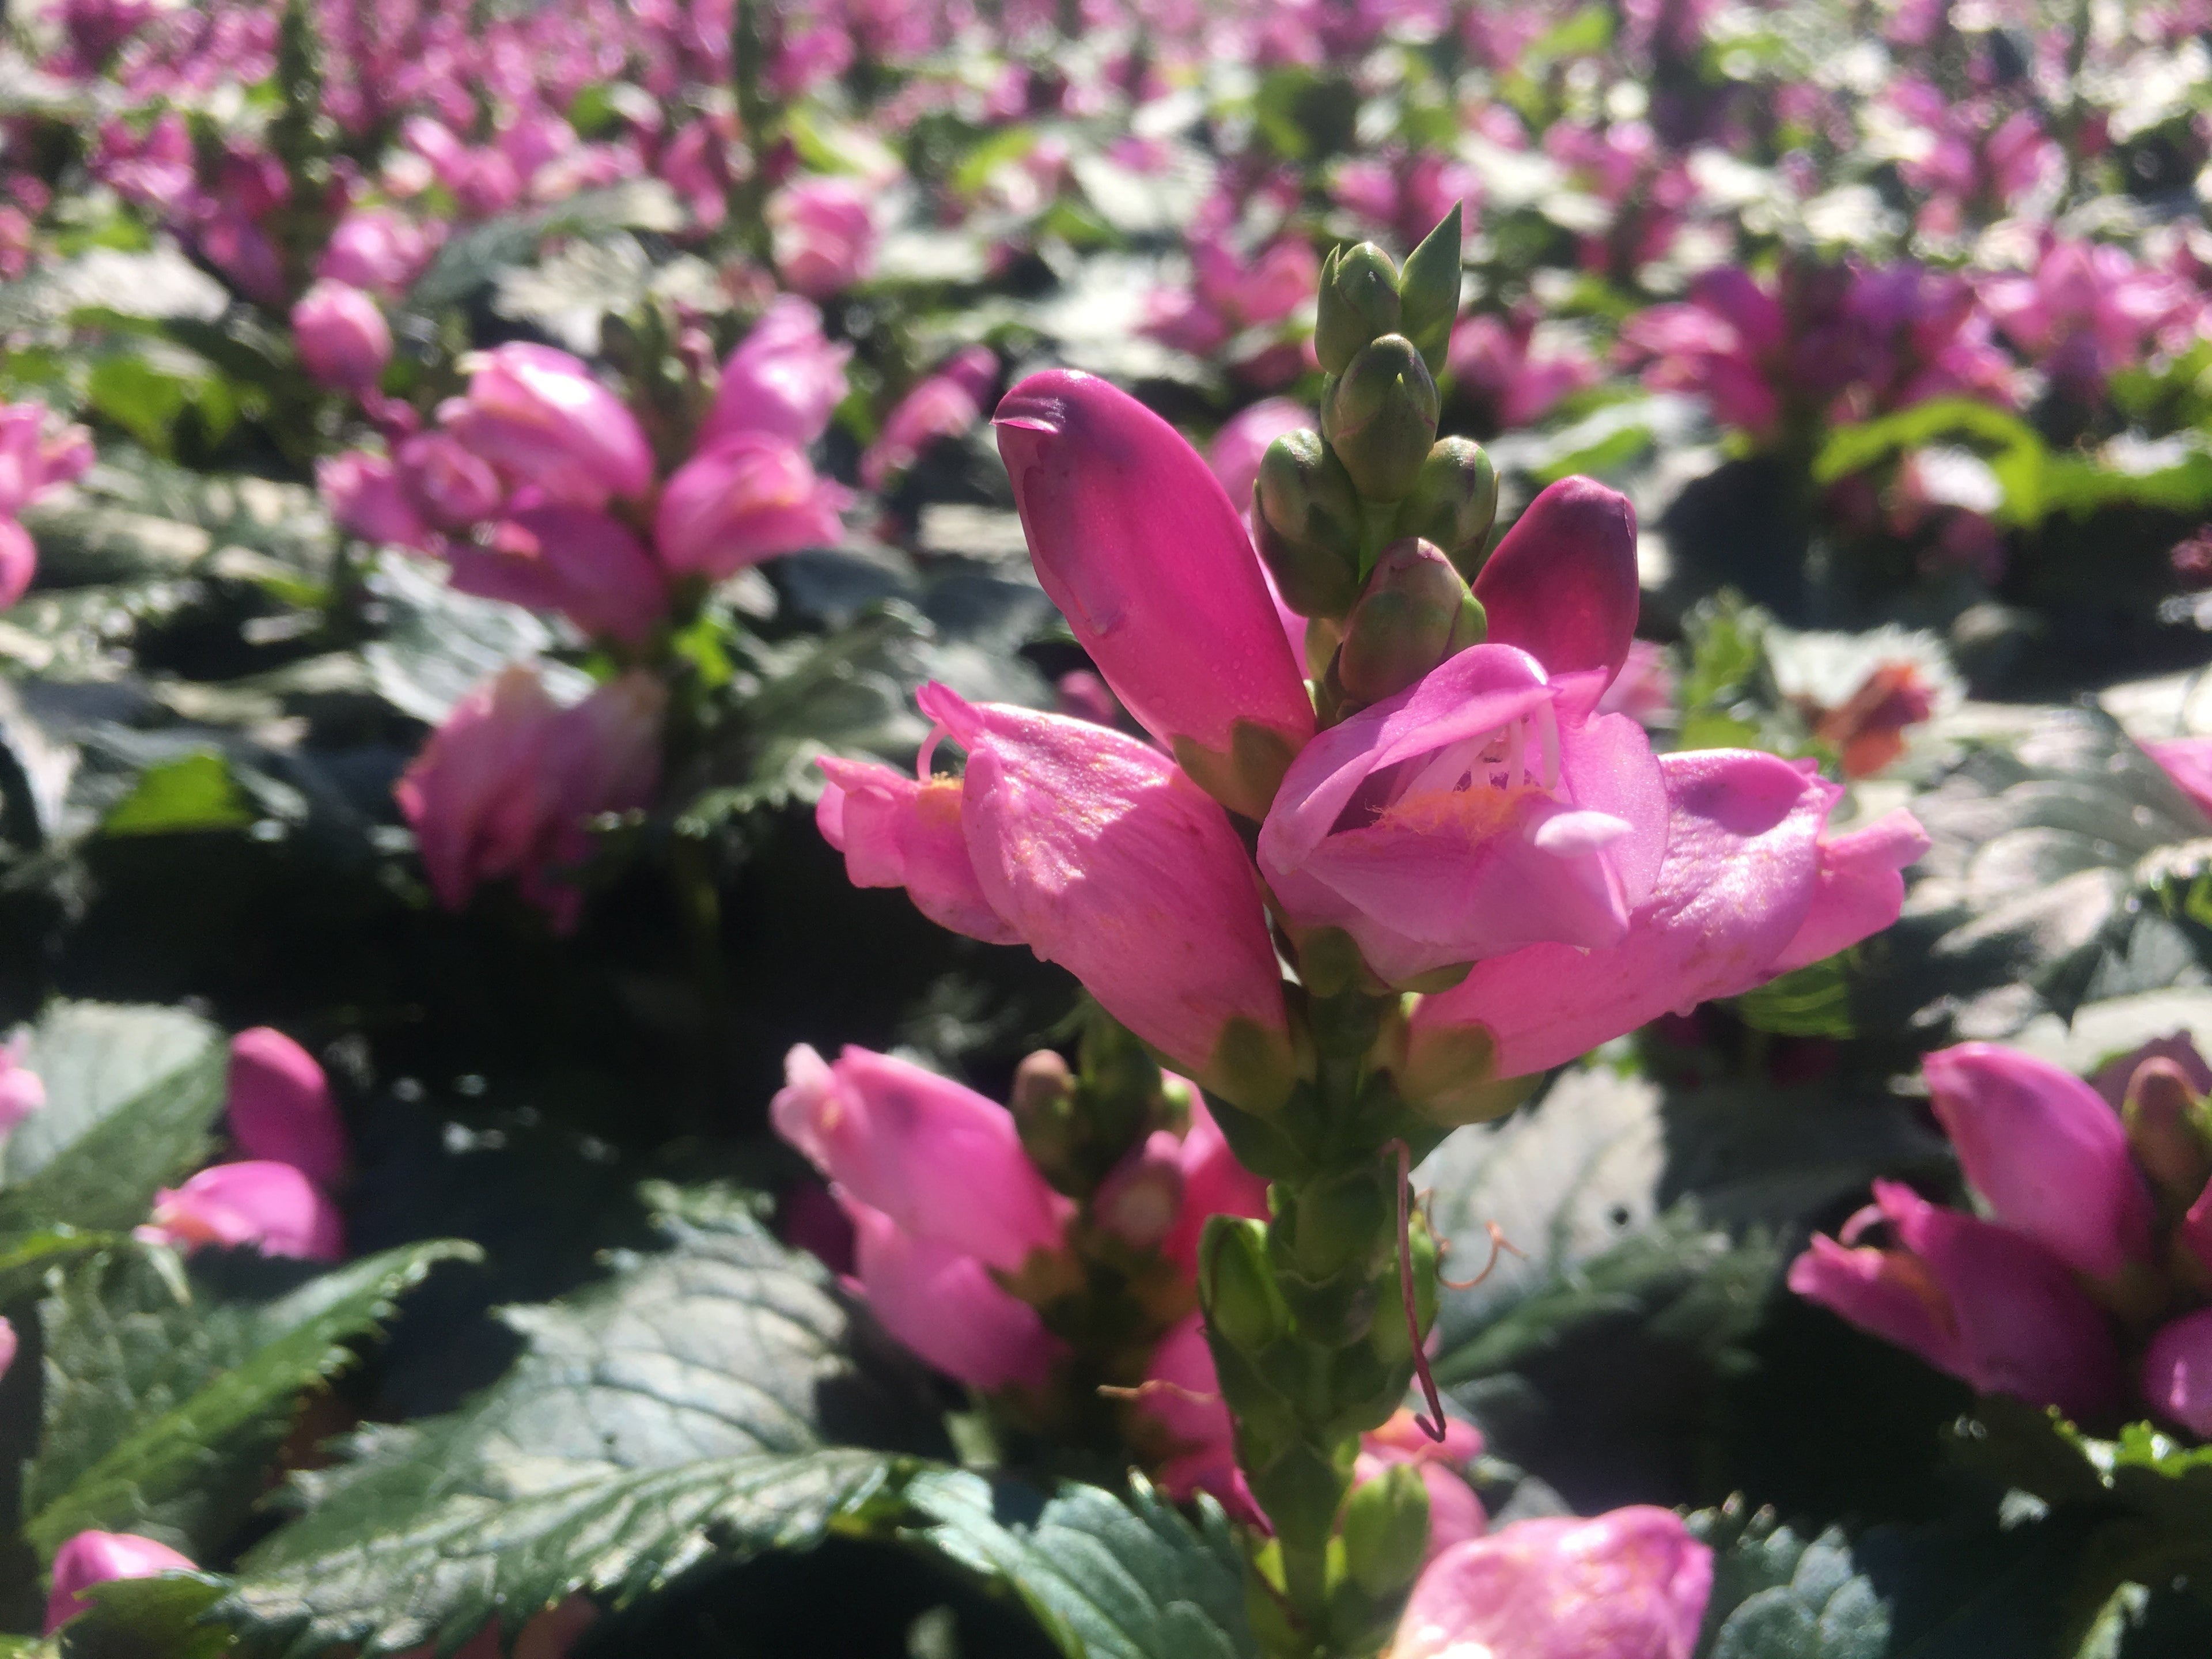 Chelone Hot Lips has bright pink flowers that attract hummingbirds and other pollinators